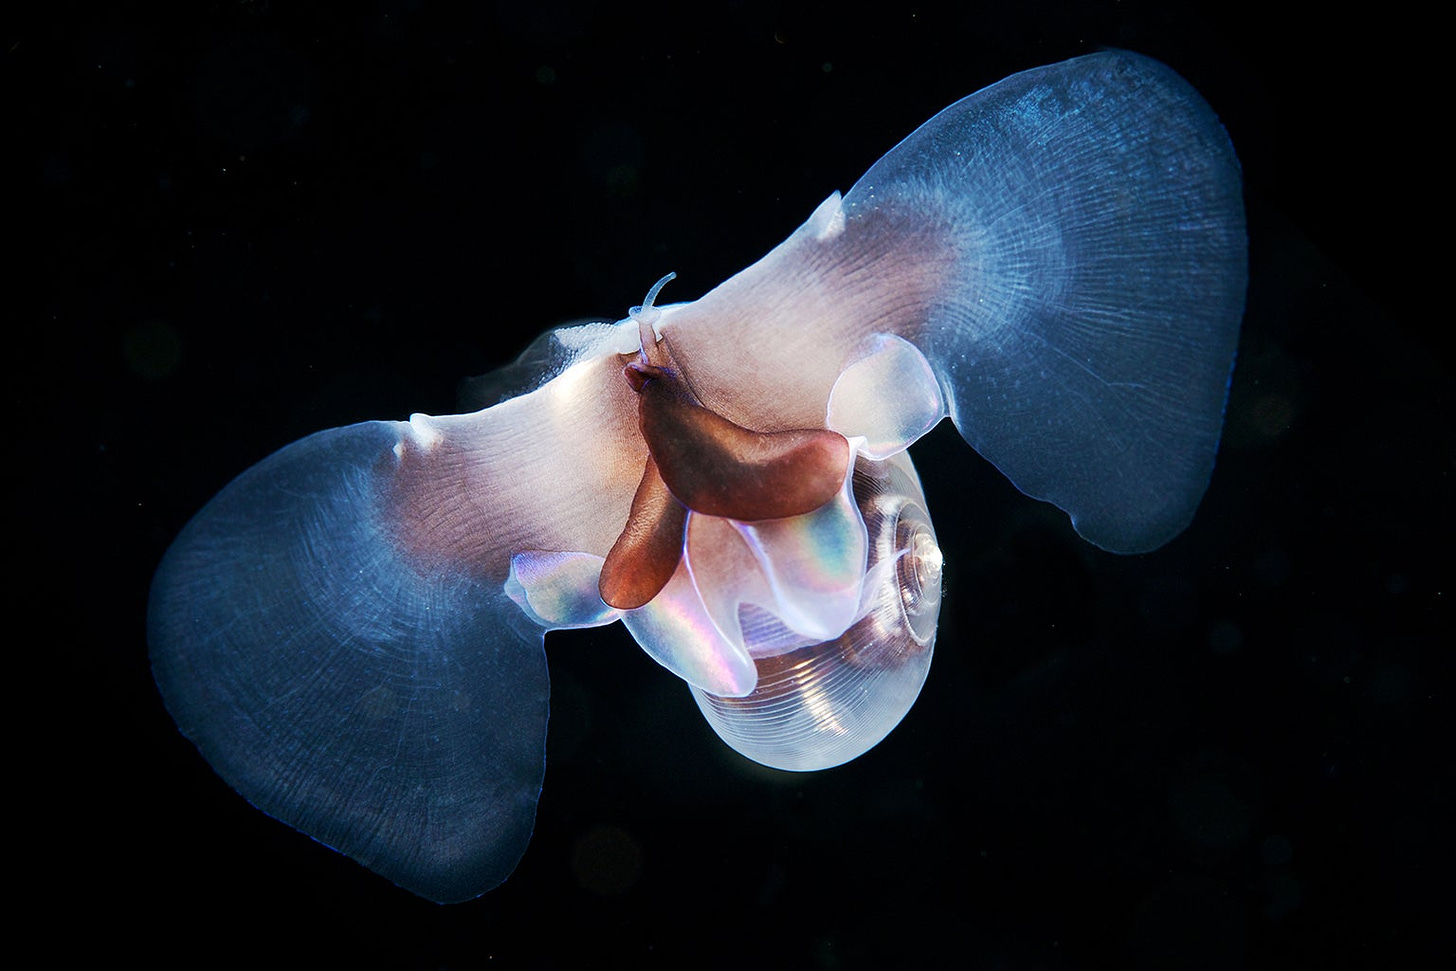 A sea butterfly in the Sea of Japan